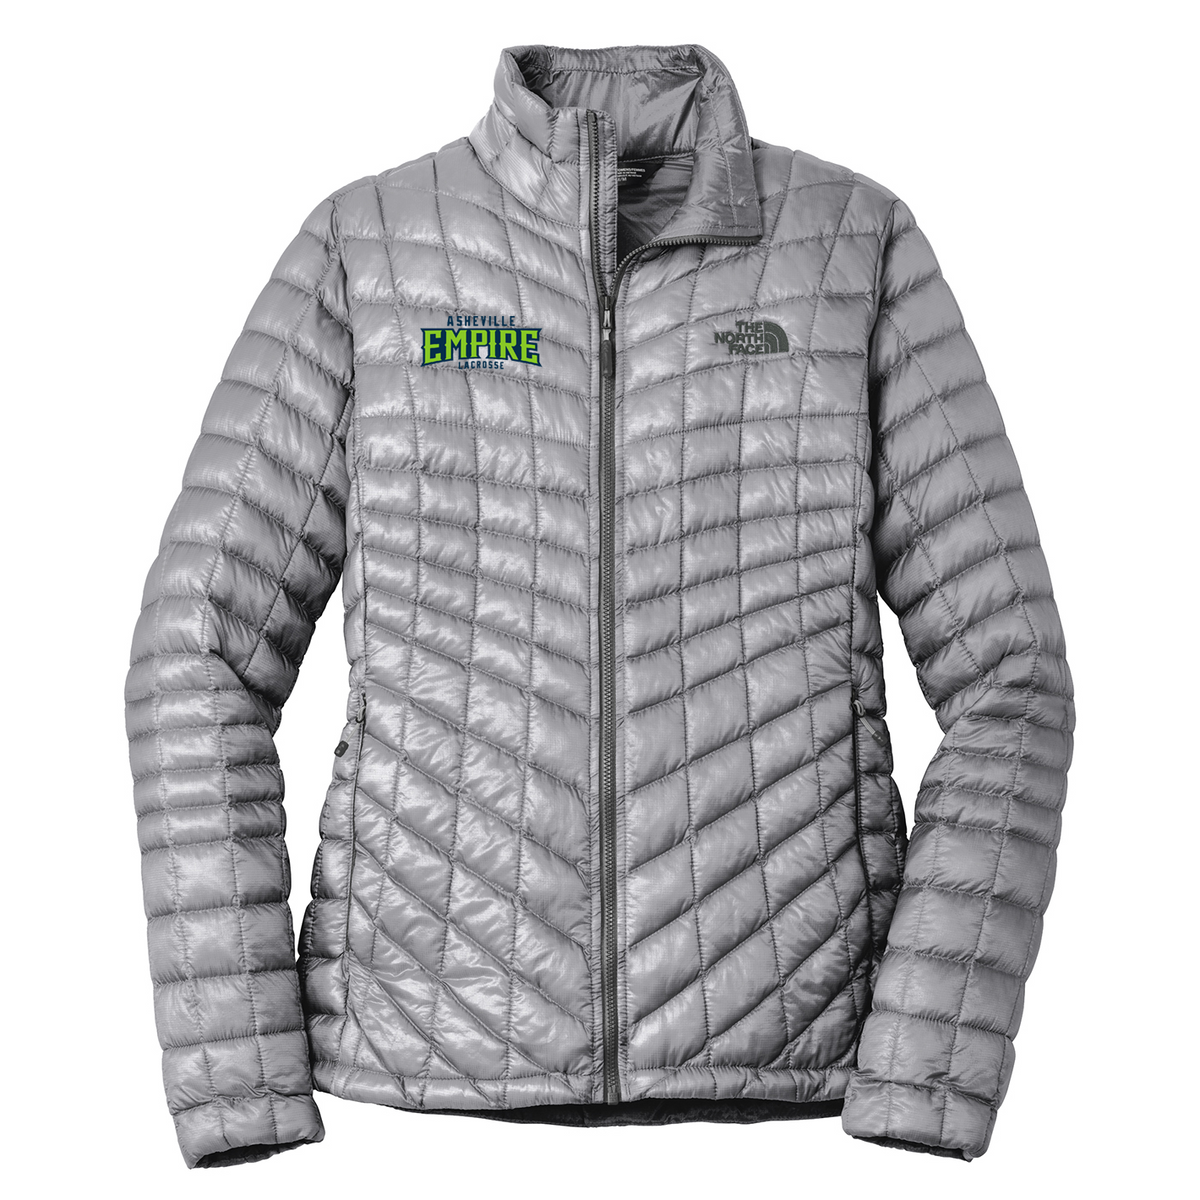 Asheville Empire Lacrosse The North Face Ladies ThermoBall Jacket